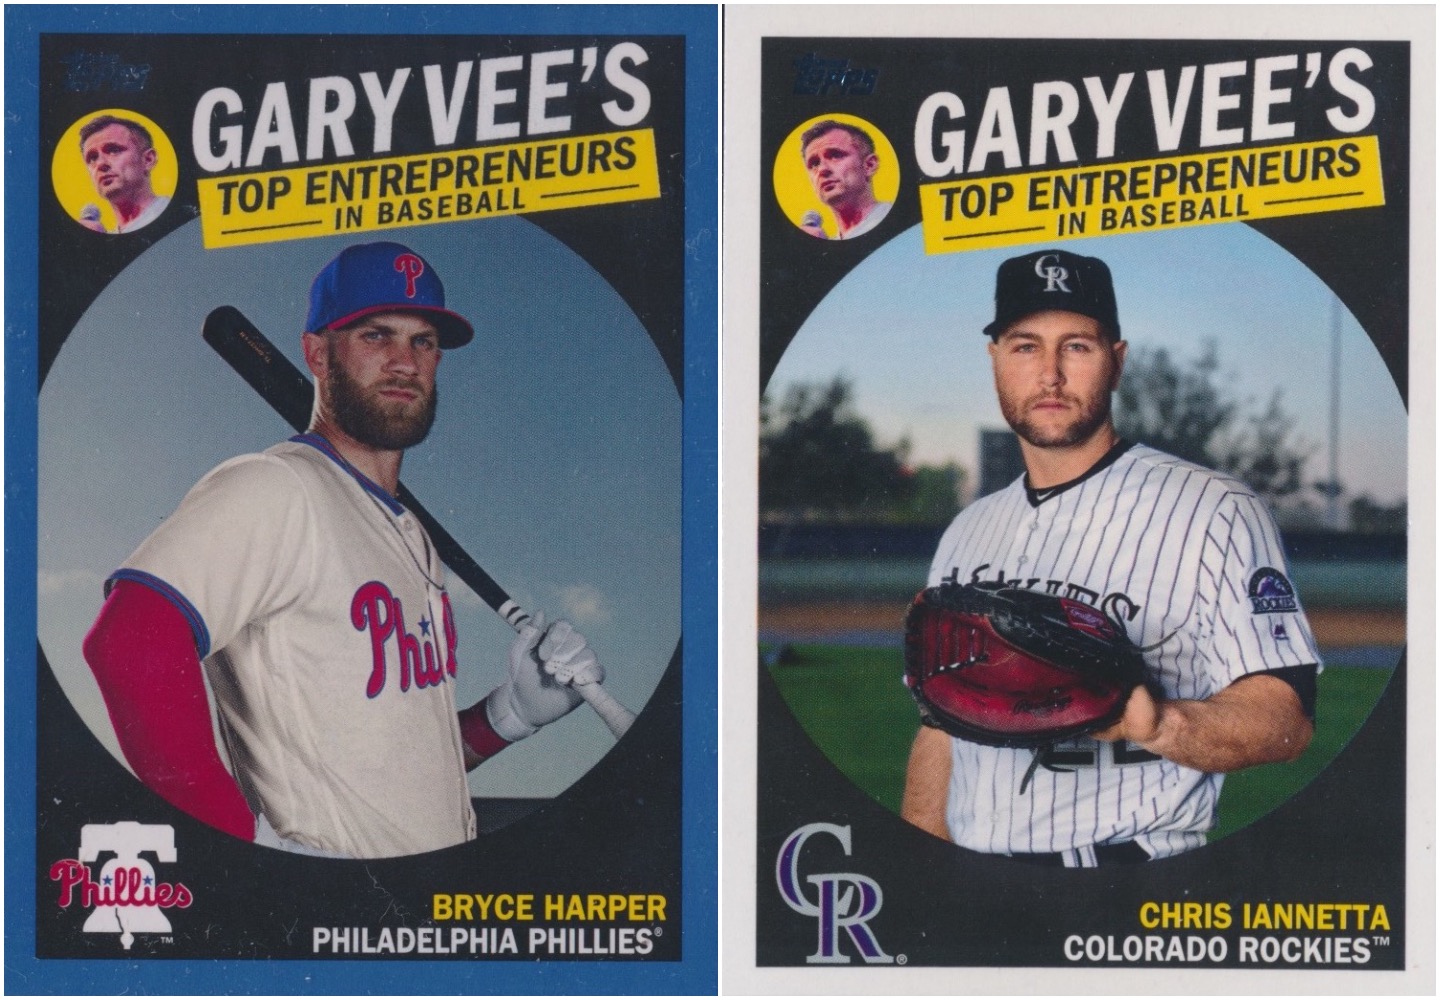 Two images of baseball sports trading cards: Bryce Harper and Chris Iannetta